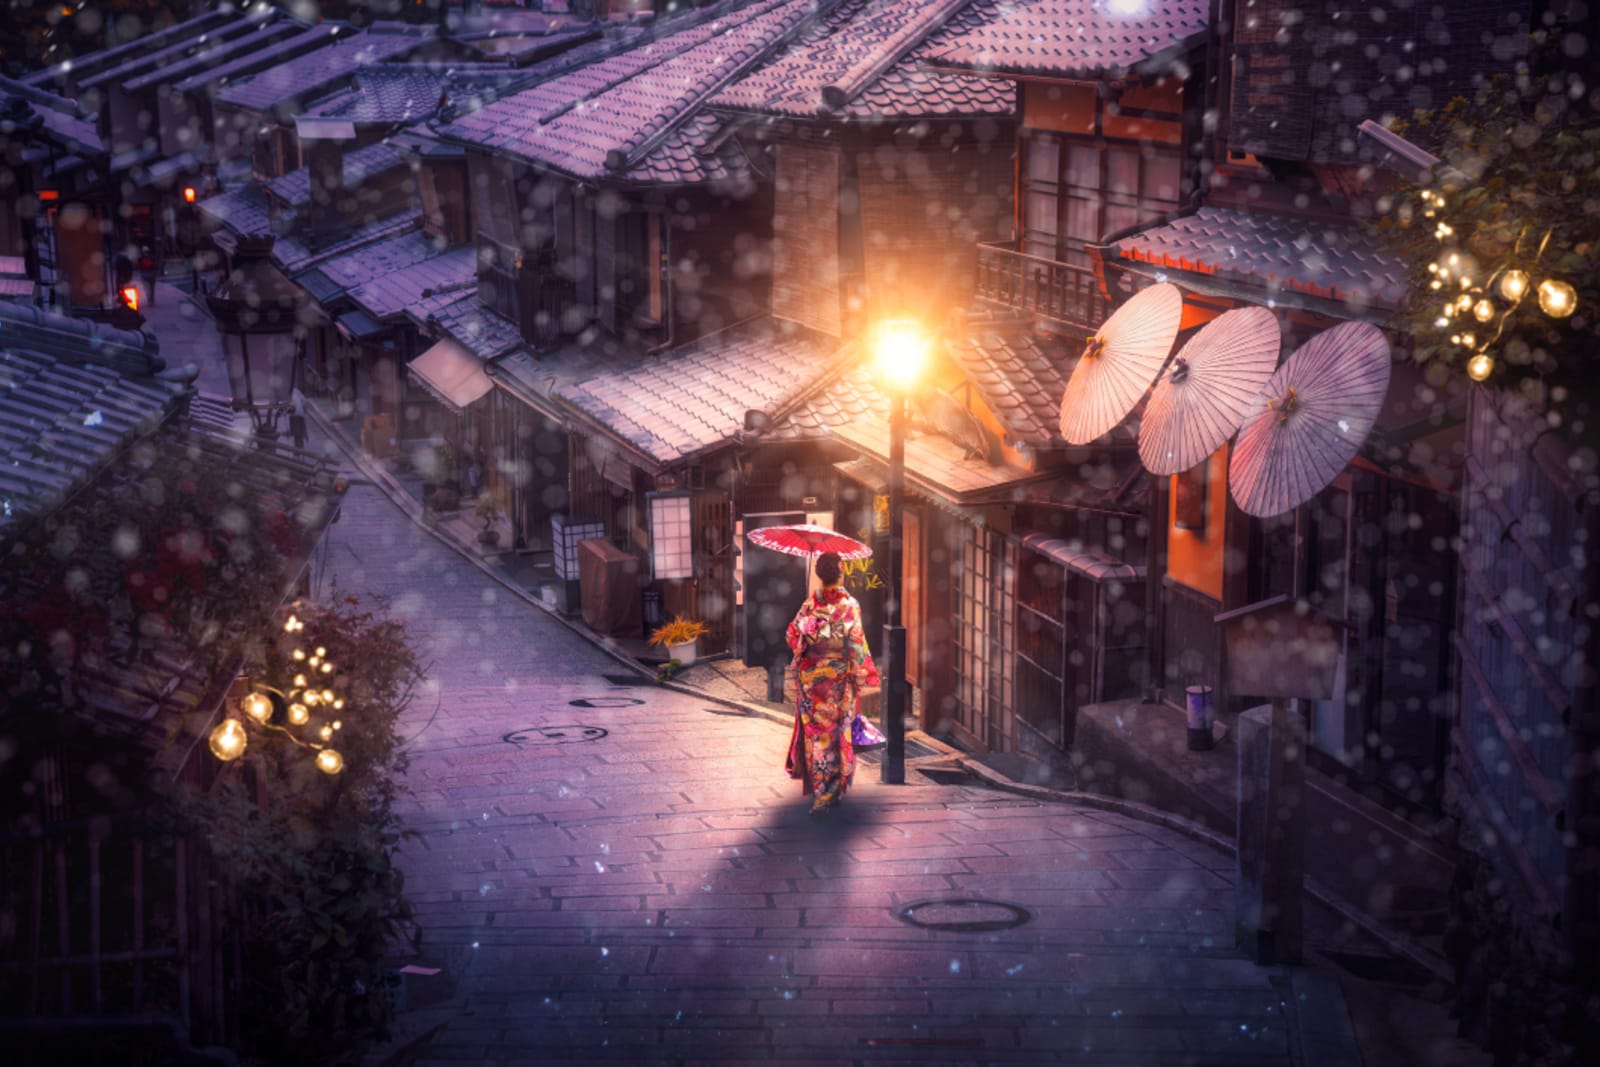 Japanese woman in snowy streets of Kyoto in Japan